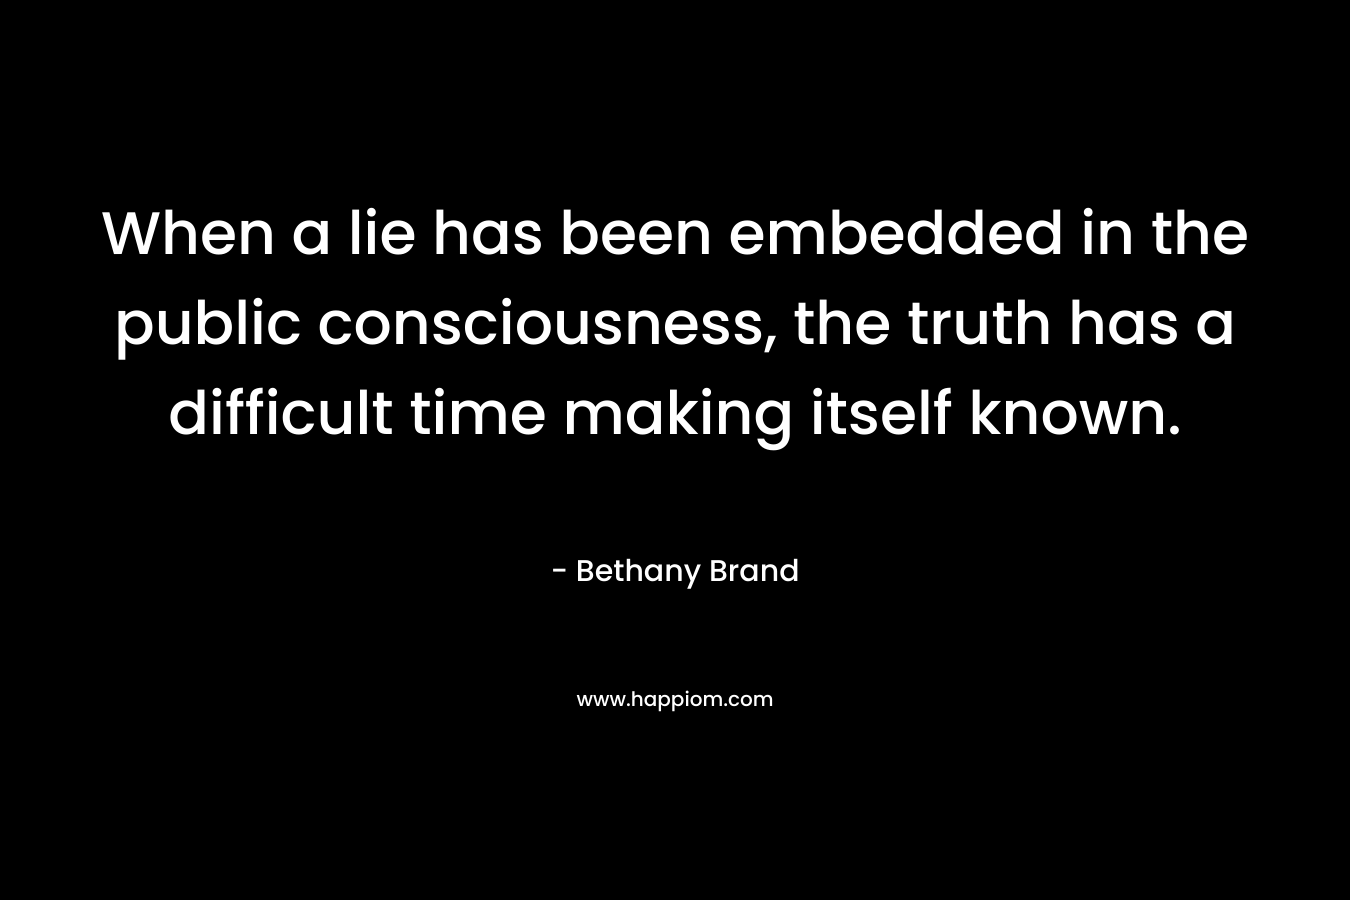 When a lie has been embedded in the public consciousness, the truth has a difficult time making itself known. – Bethany Brand